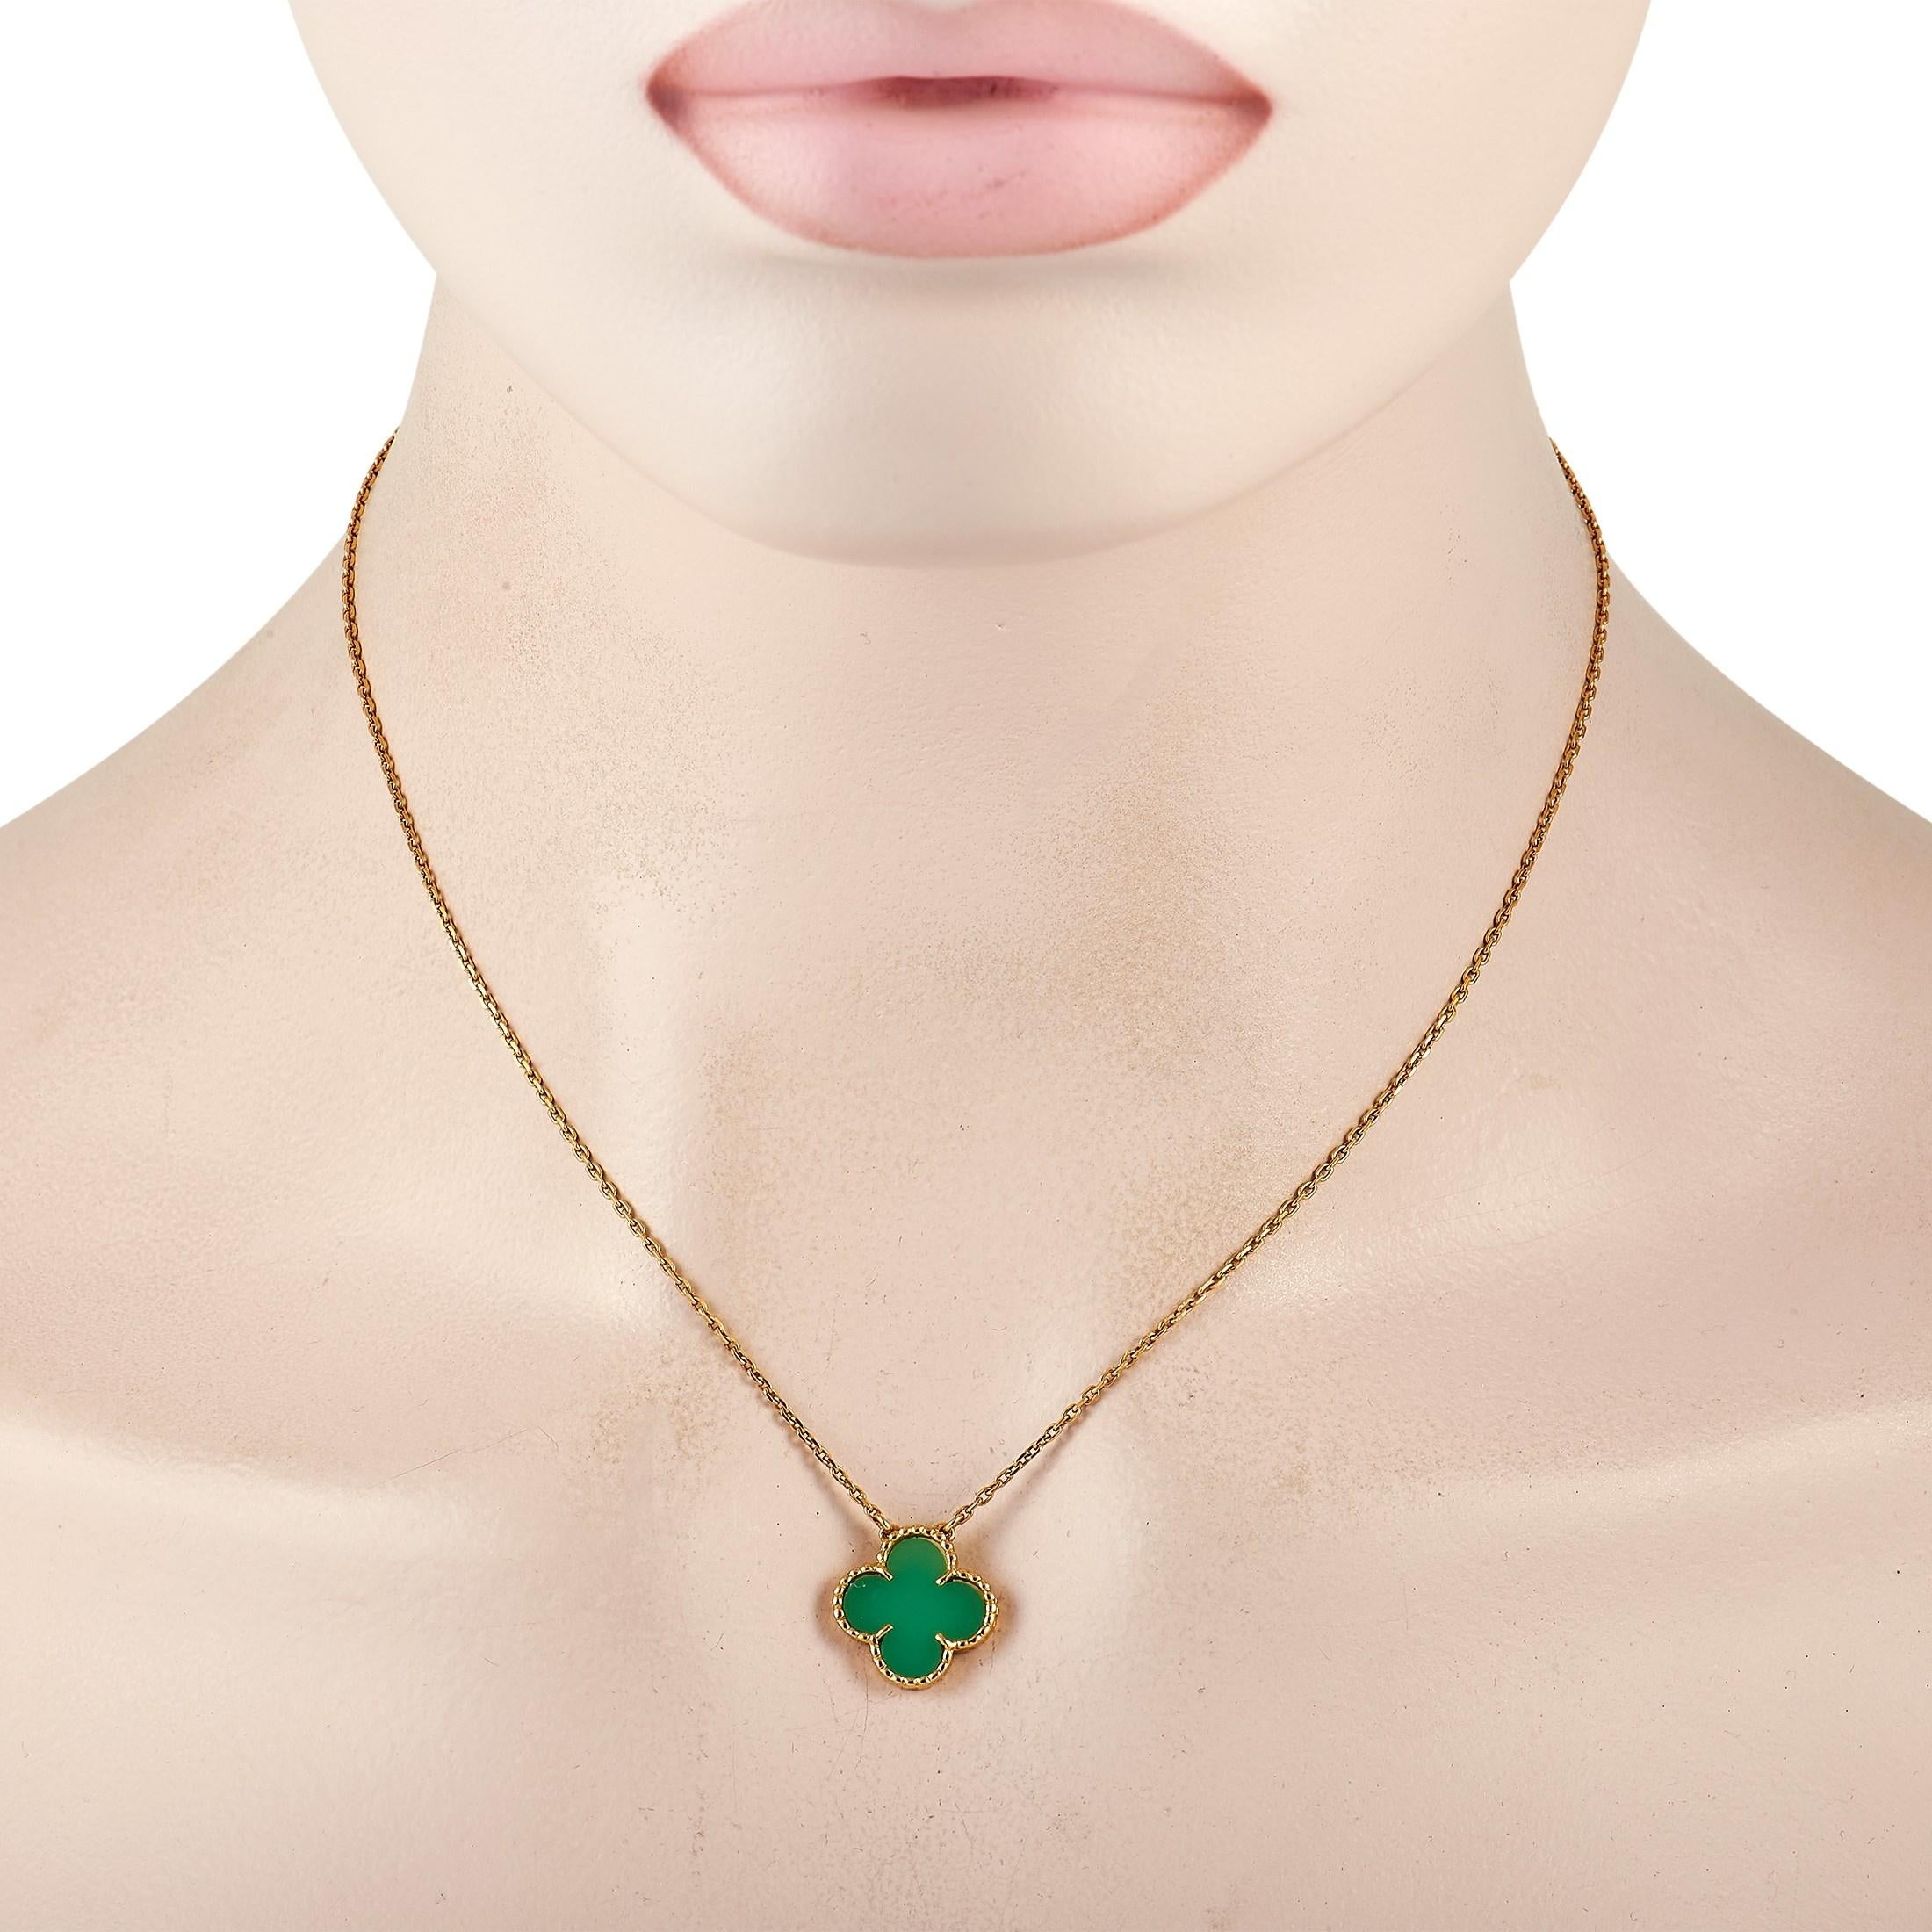 Bring an elegant pop of color to any ensemble with this Van Cleef & Arpels Alhambra 18K Yellow Gold Chalcedony Necklace. The 0.65